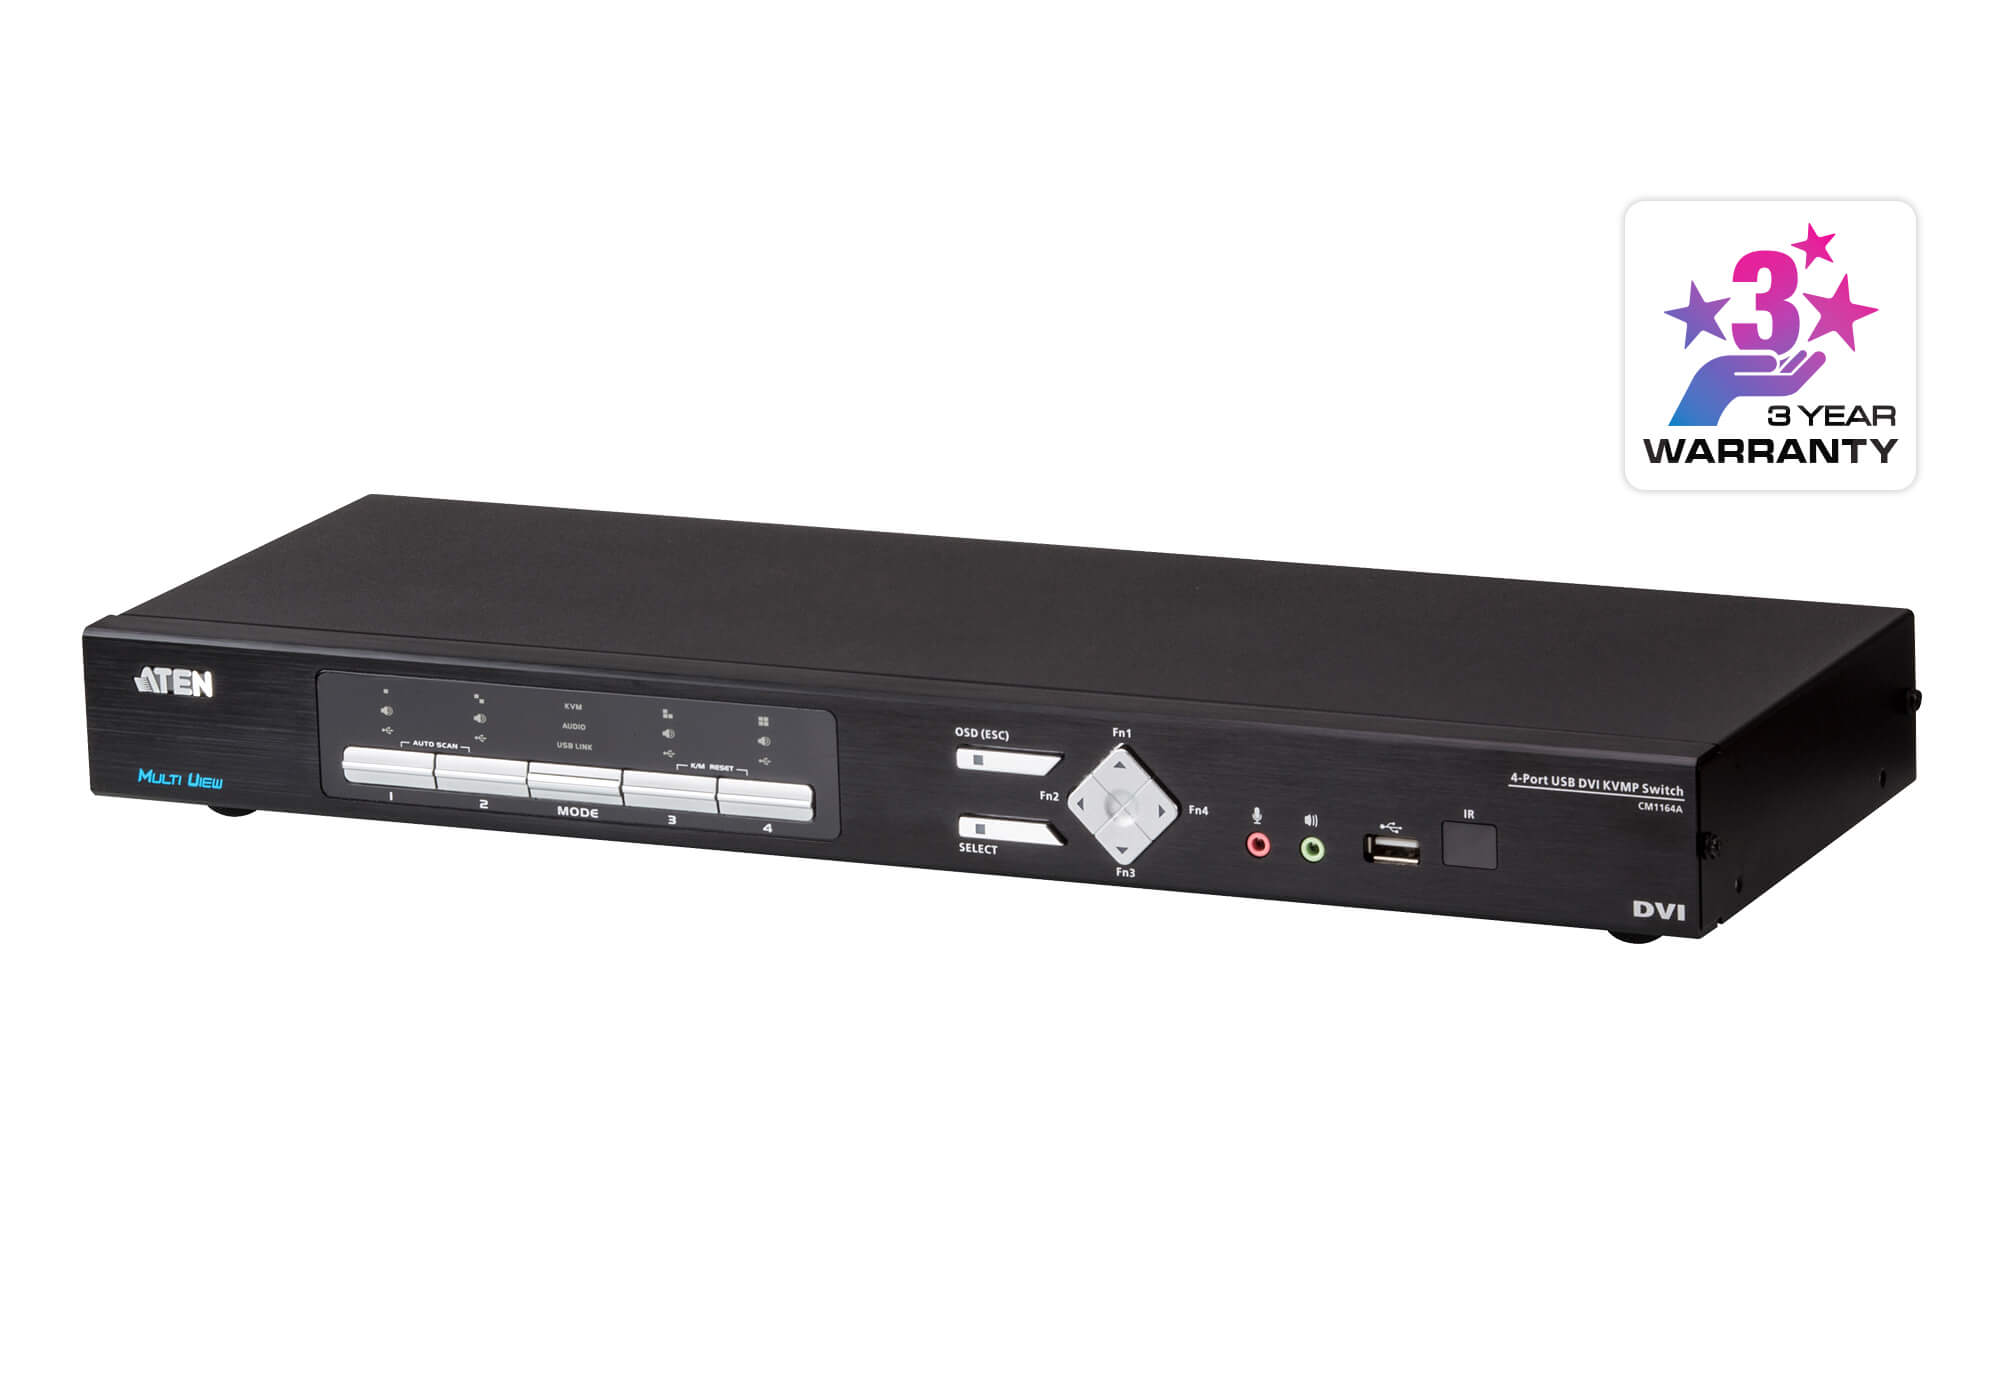 KVM Switches/Aten: Aten, 4-Port, DVI, Multi-View, KVMP, Switch, Quad, View, with, Picture, in, Picture, support, up, to, 1920, x, 1200, @, 60, Hz, 4, DVI, USB, 